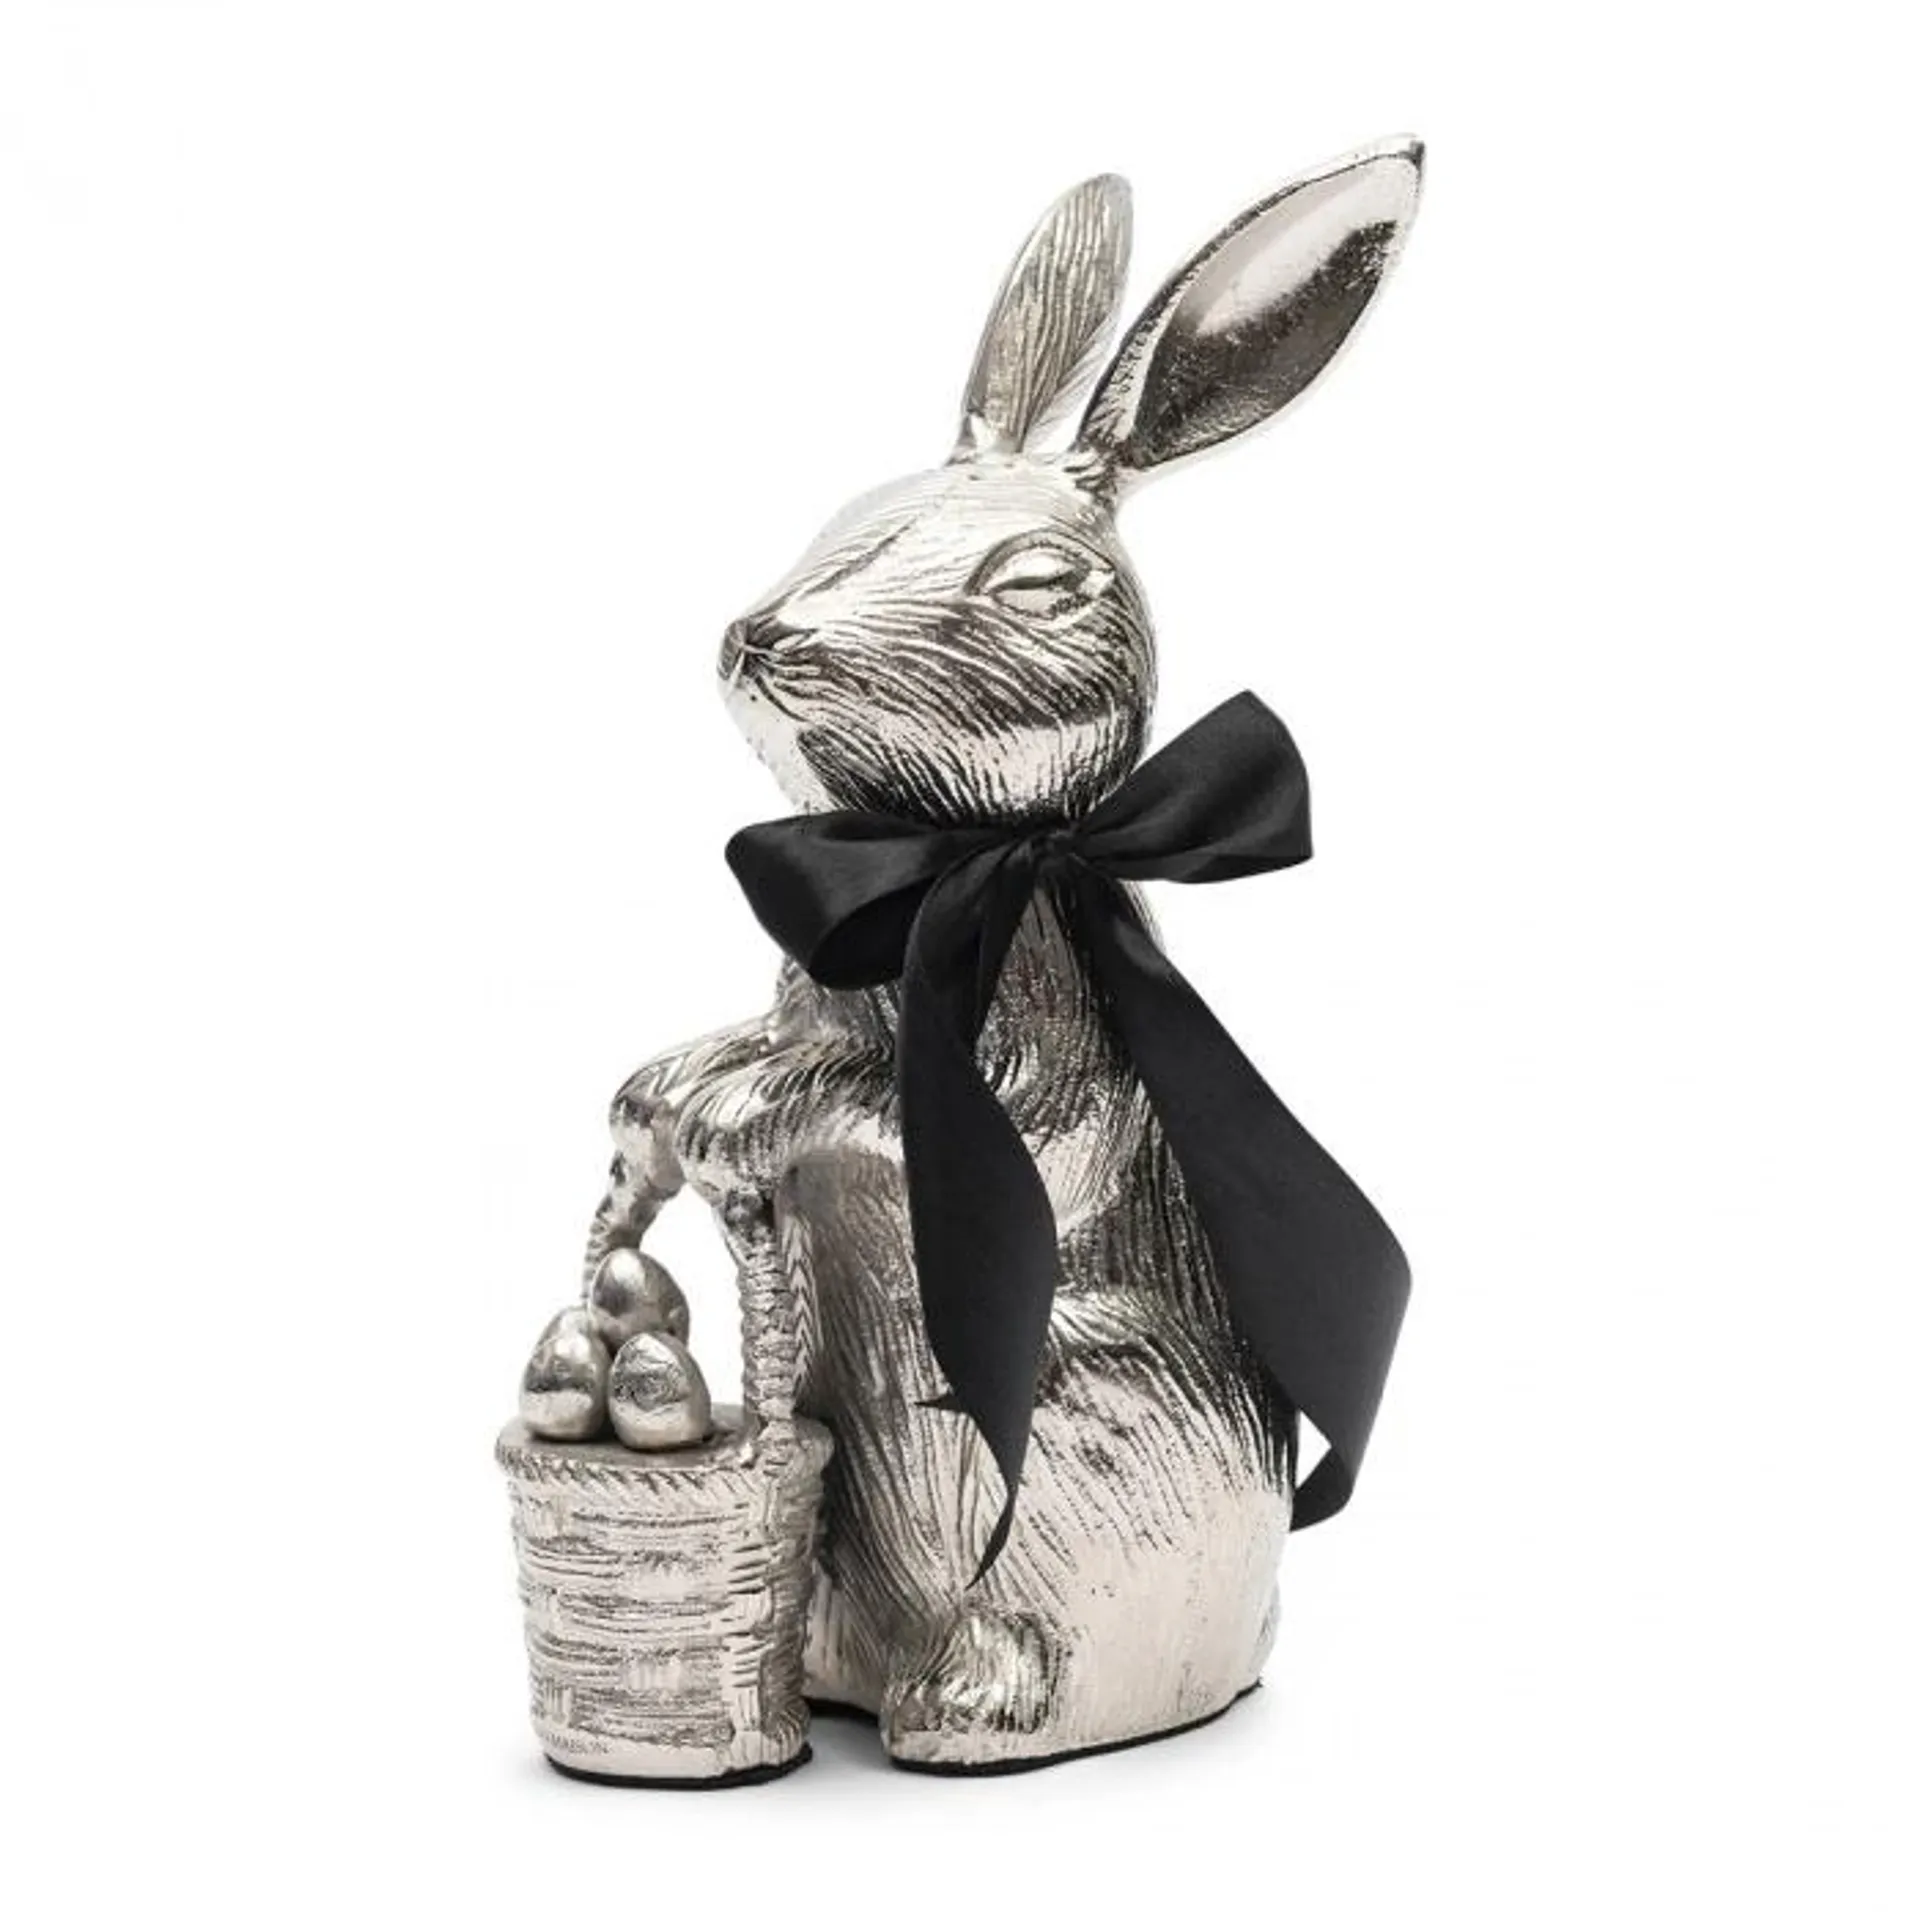 Easter Bunny With Egg Basket